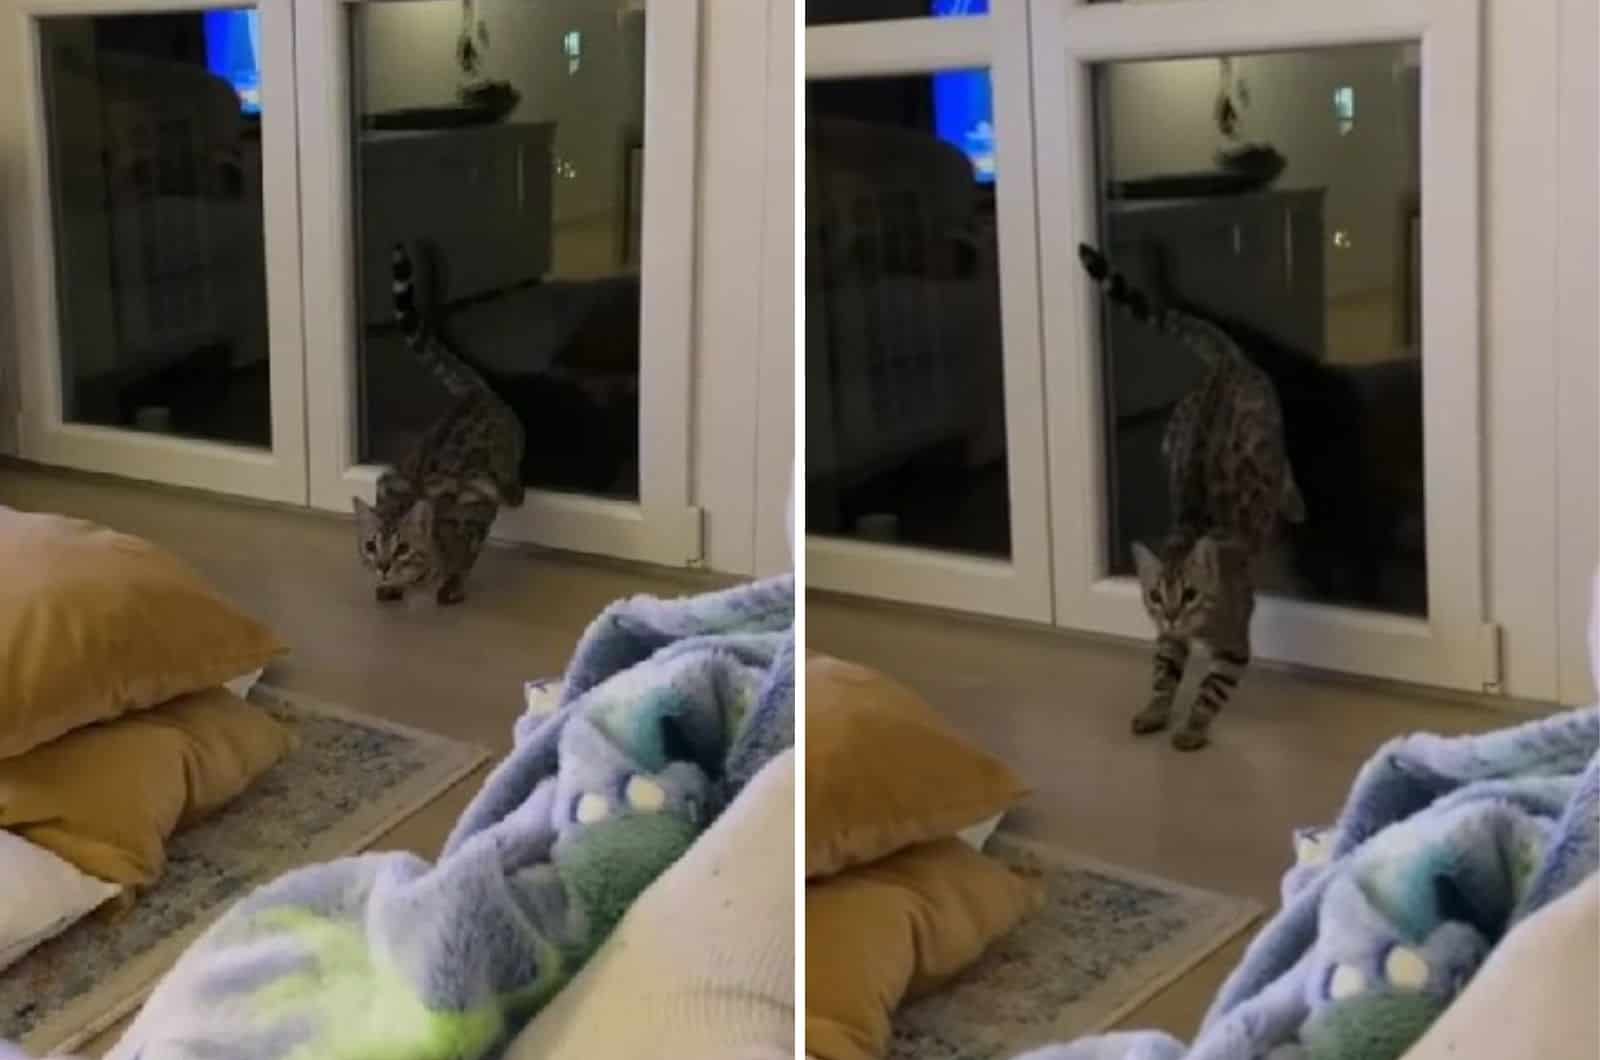 the cat pushes away from the window to run faster